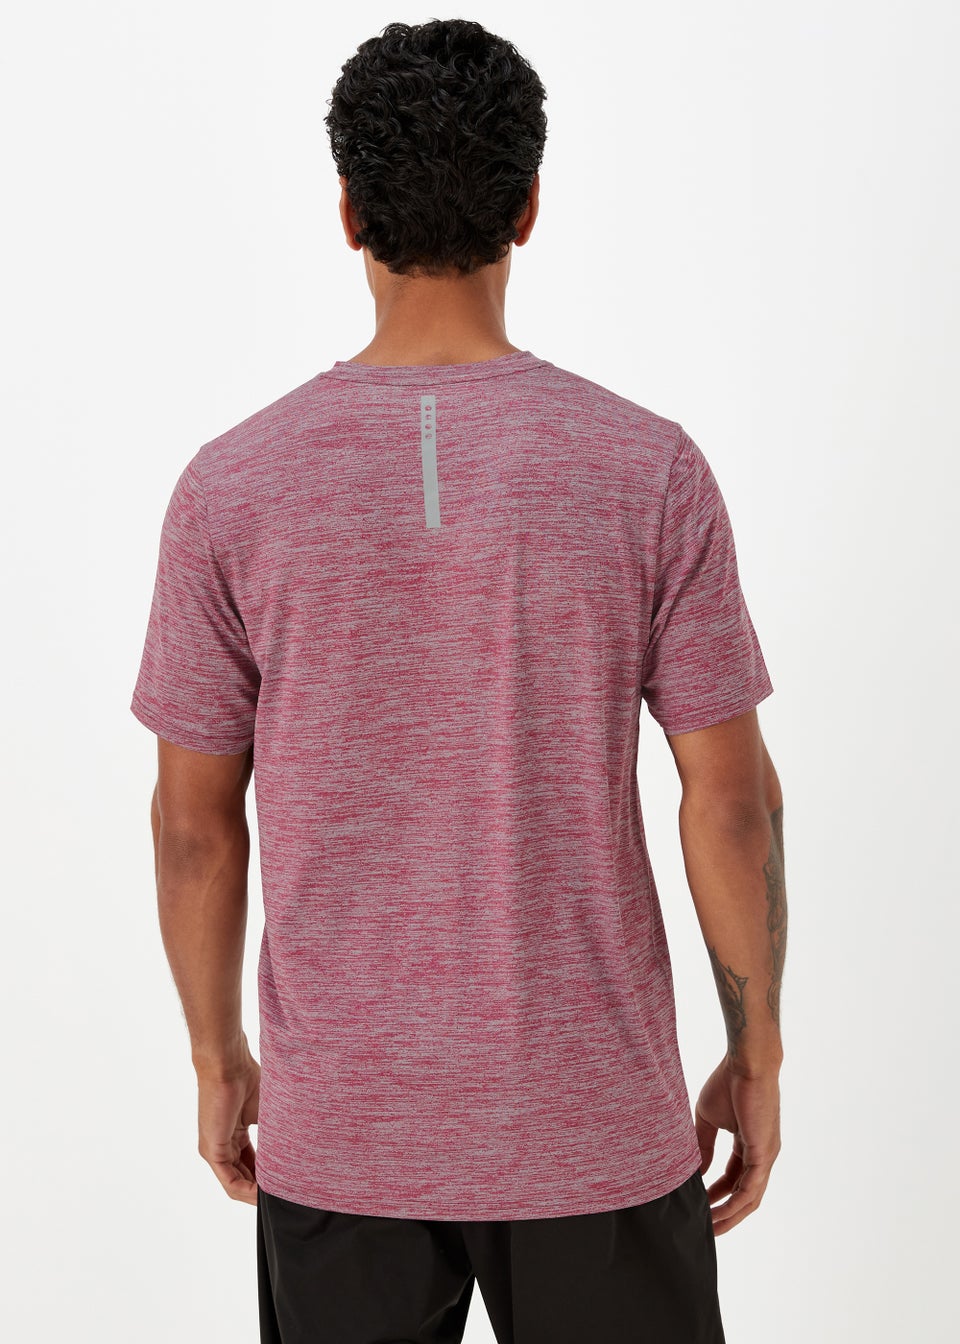 Souluxe Berry Panel Sports T-Shirt